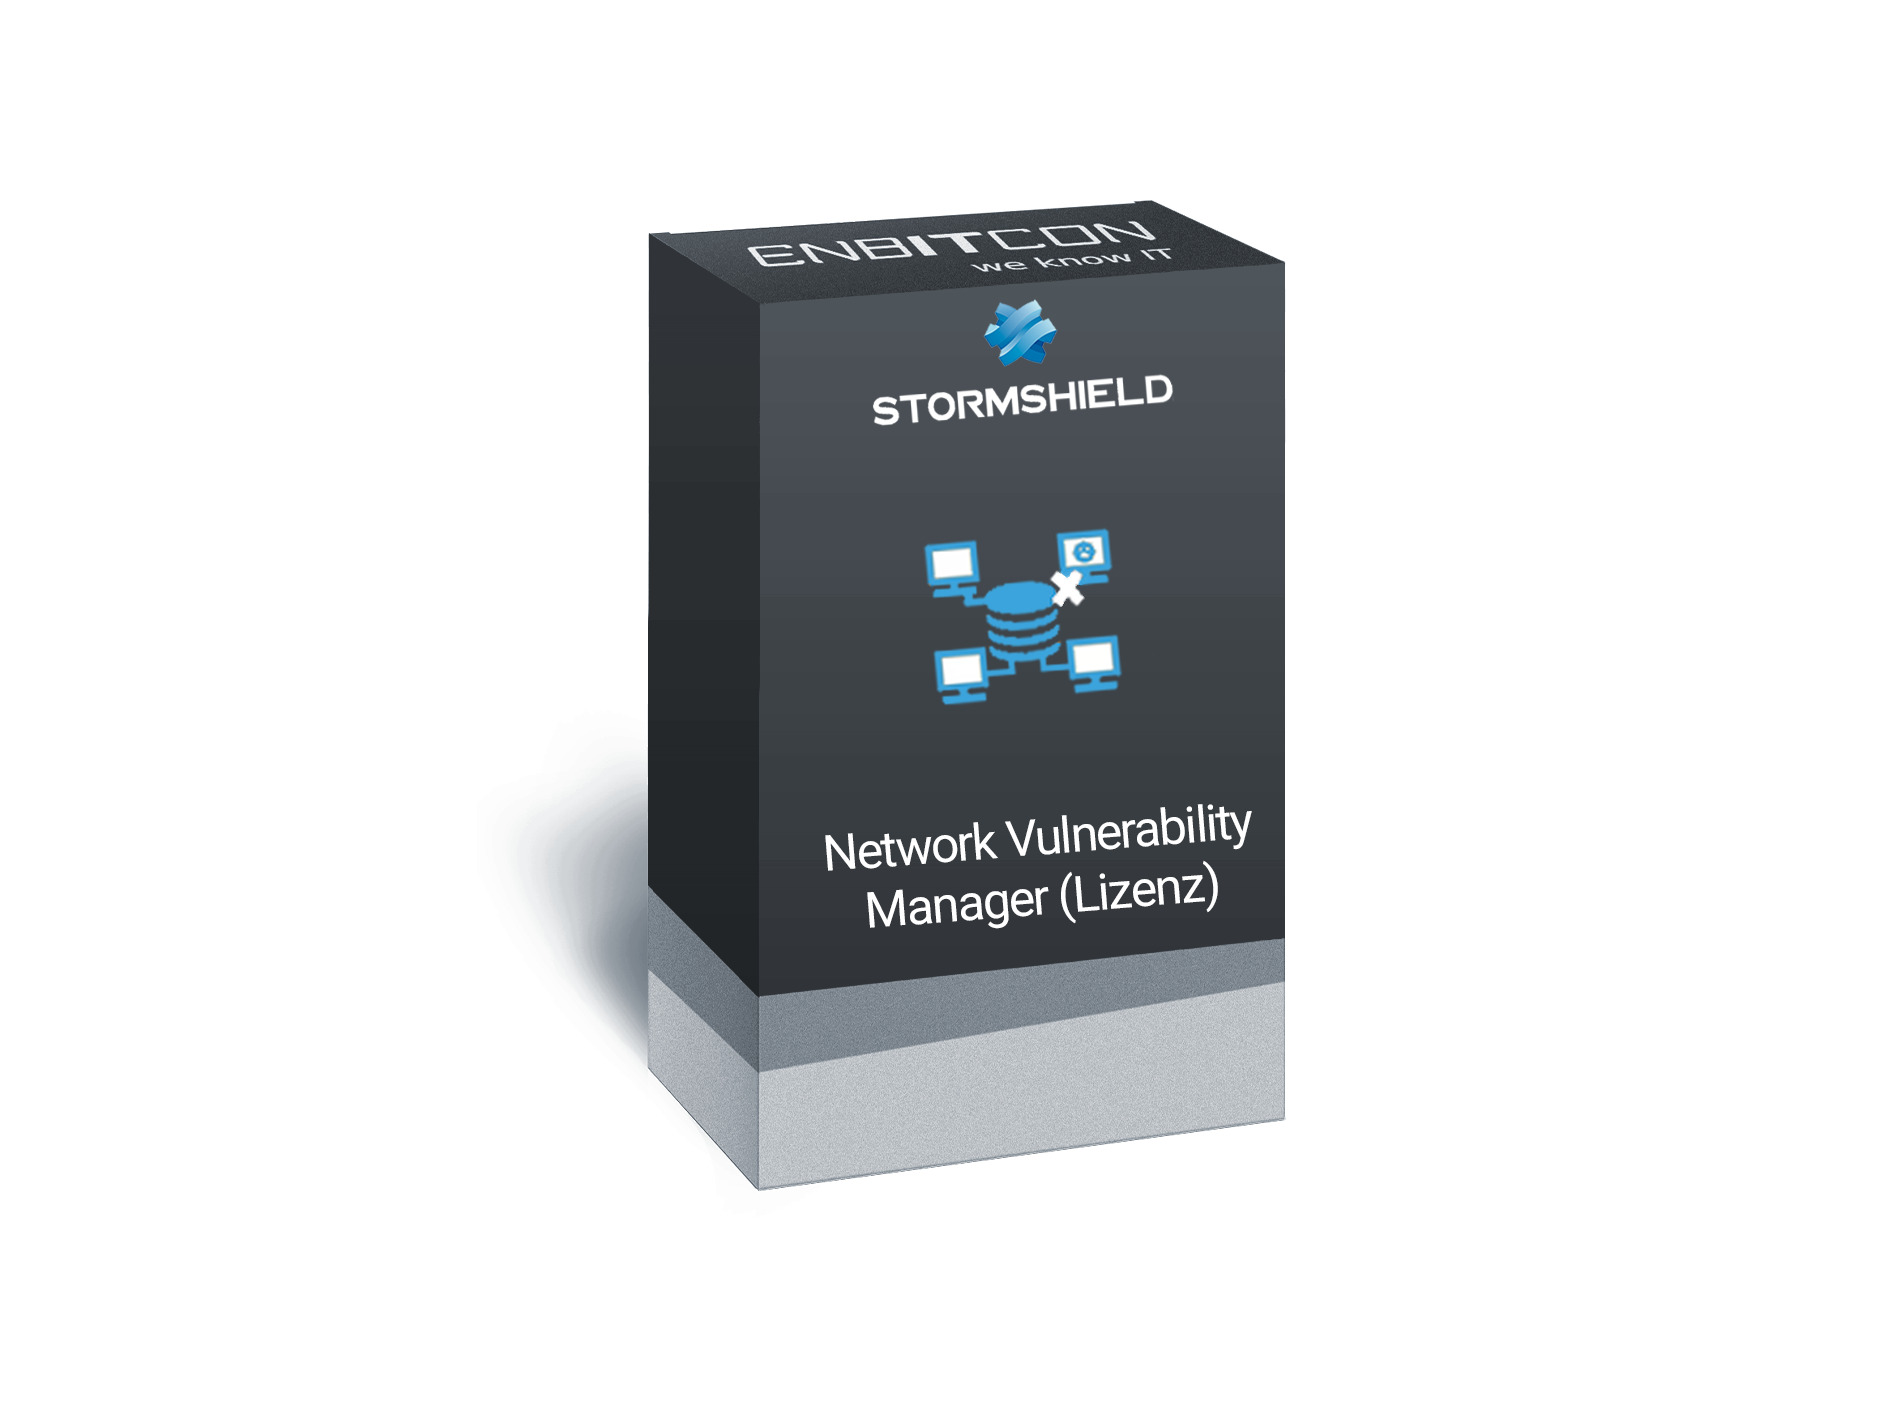 Stormshield SN510 Network Vulnerability Manager option